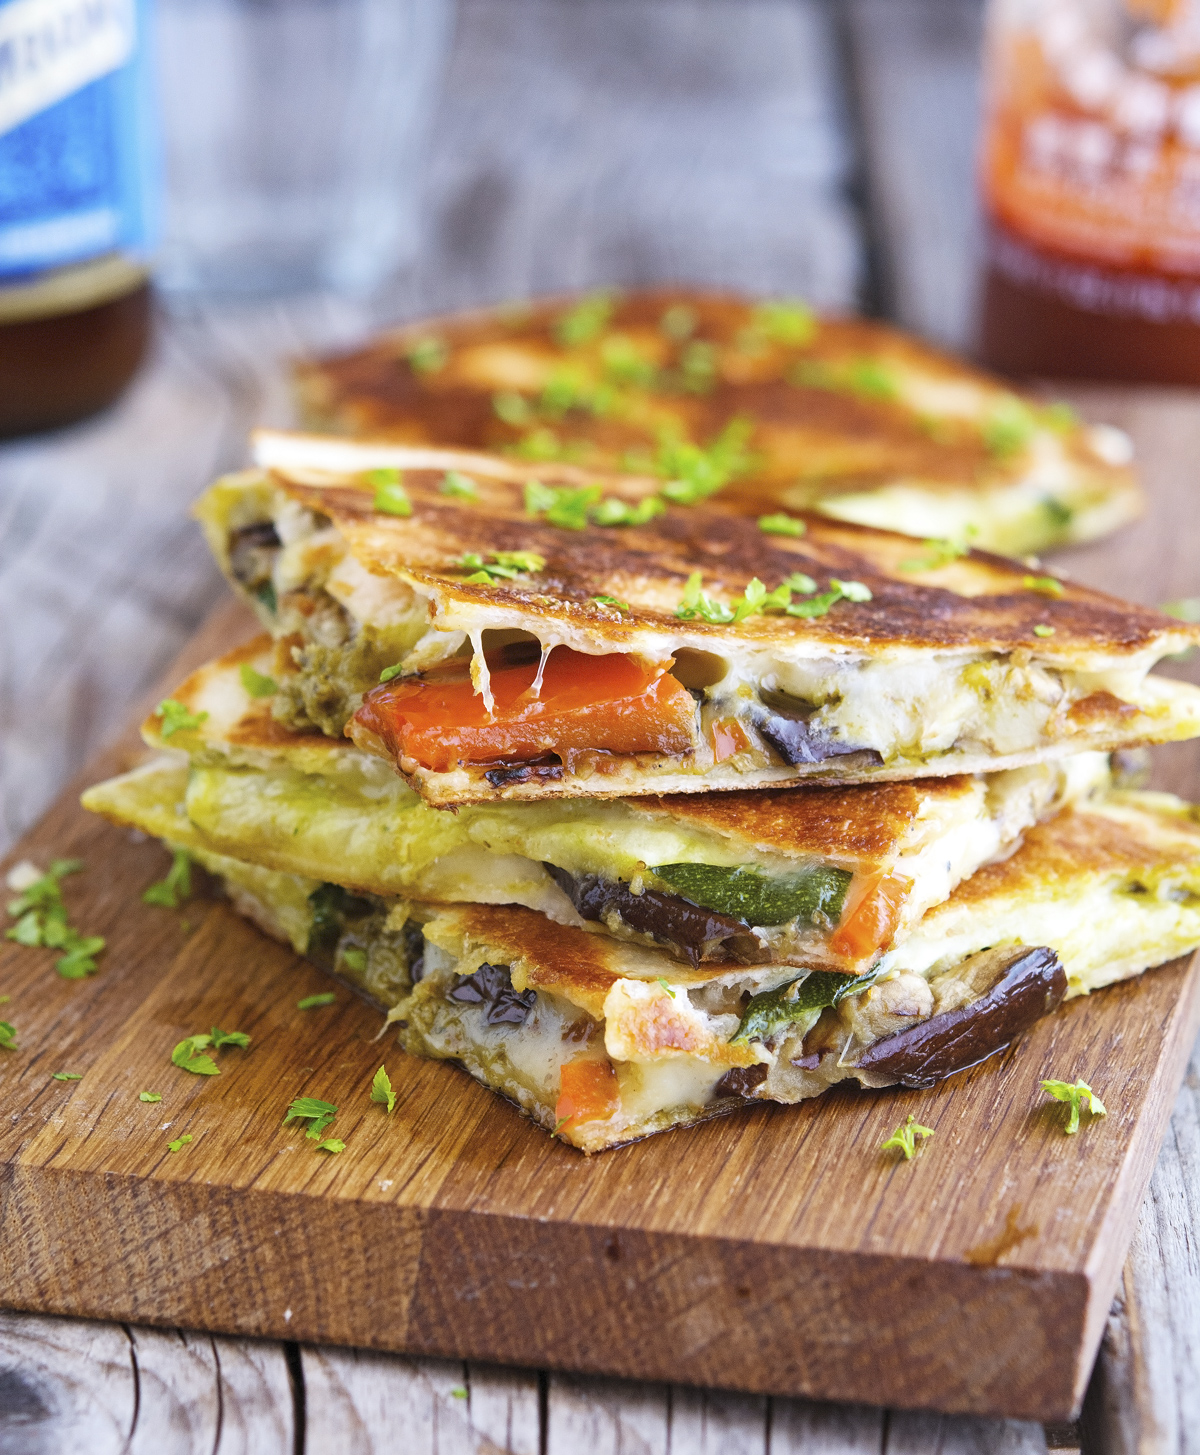 Grilled Vegetable Quesadillas with Kale Pesto